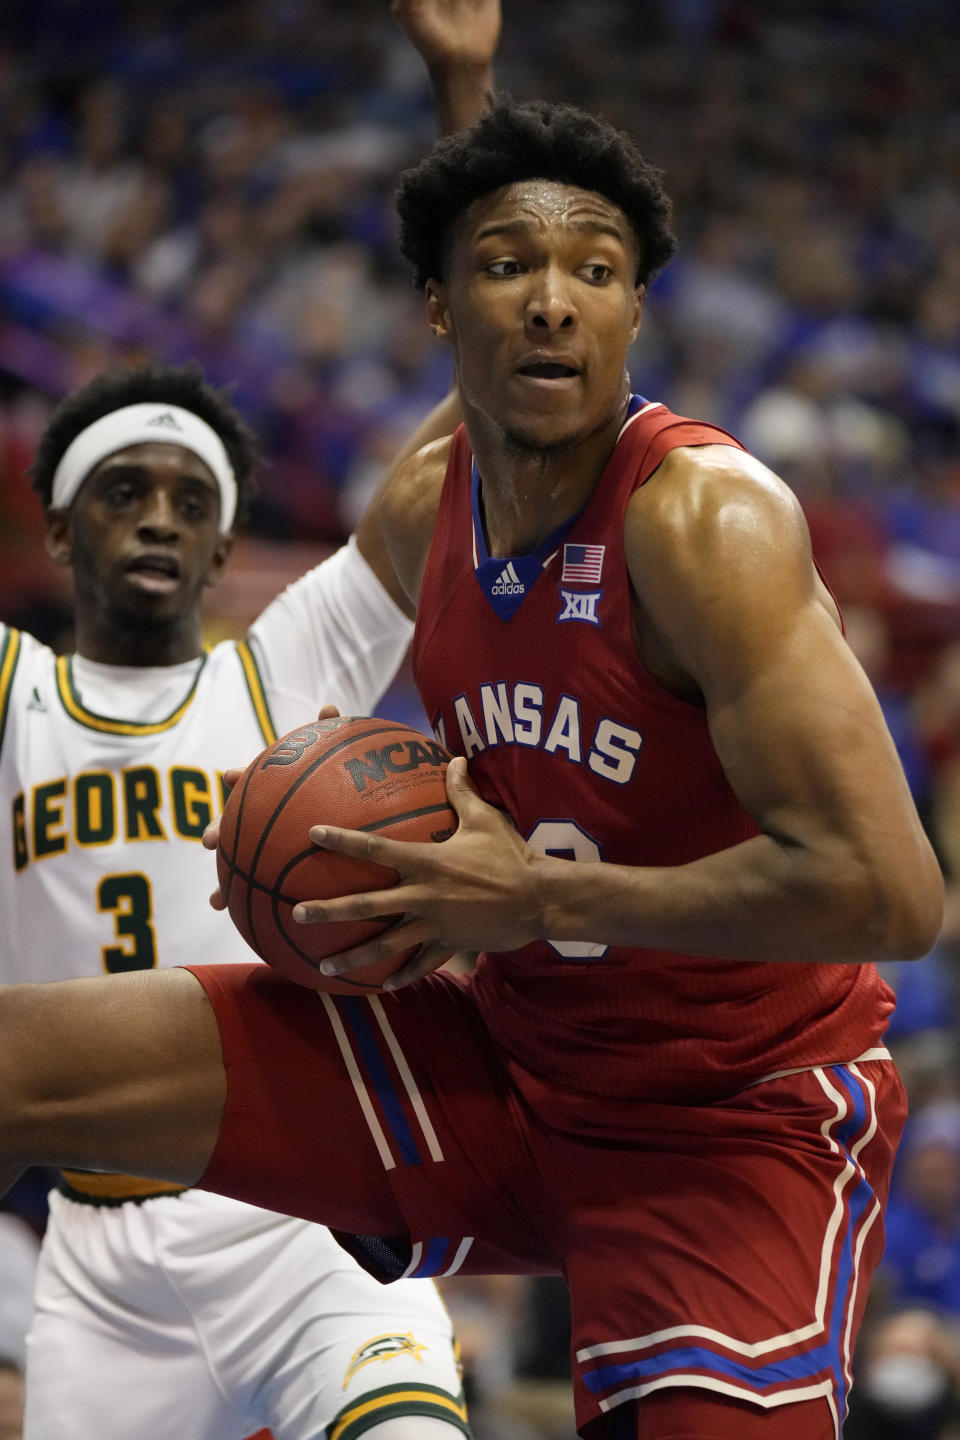 Kansas forward David McCormack, right, rebounds against George Mason guard Davonte Gaines (3) during the first half of an NCAA college basketball game in Lawrence, Kan., Saturday, Jan. 1, 2022. (AP Photo/Orlin Wagner)